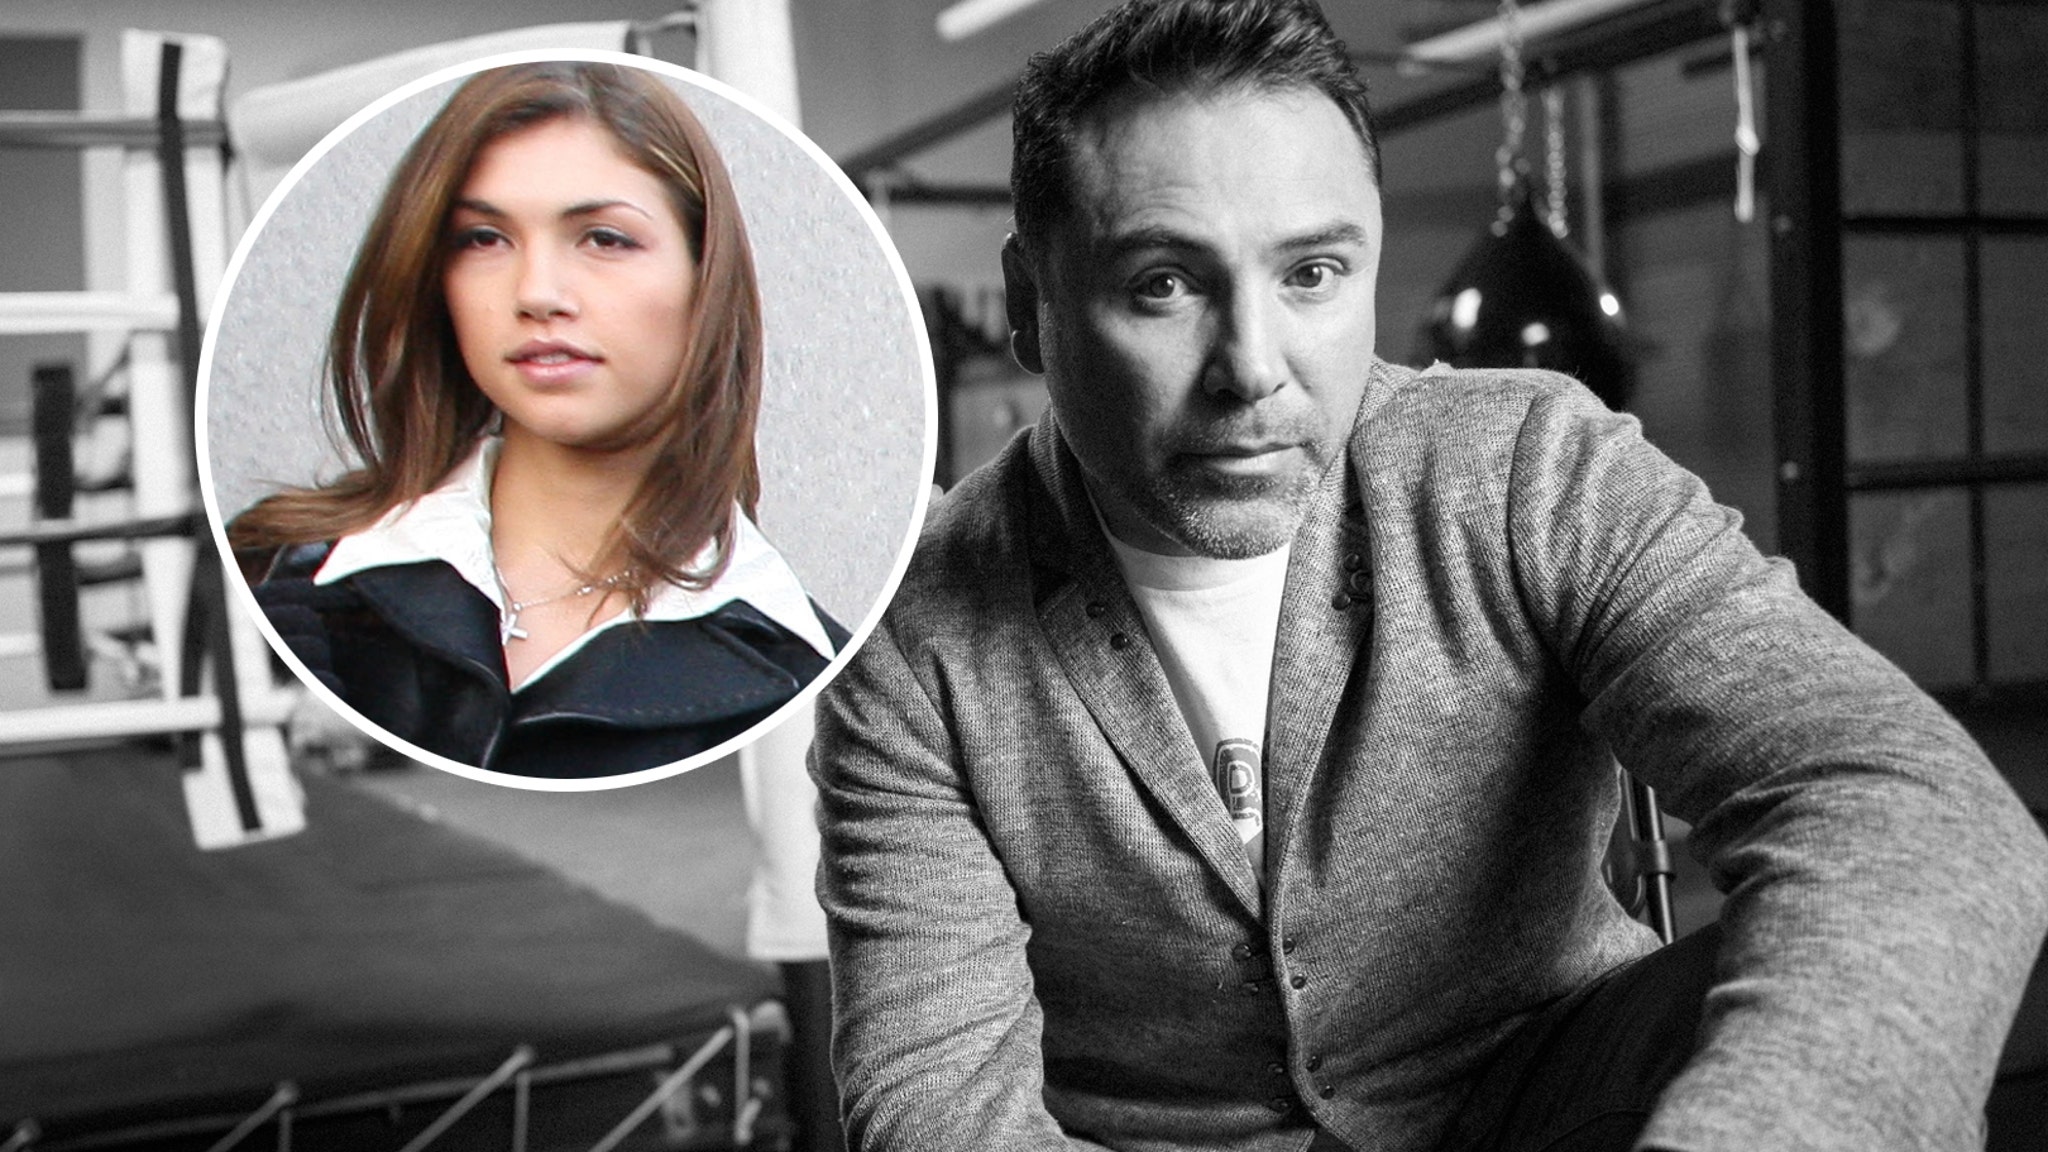 Oscar De La Hoya and Ex-Stripper Converse Out on Lingerie Pictures and Their Tried Coverup